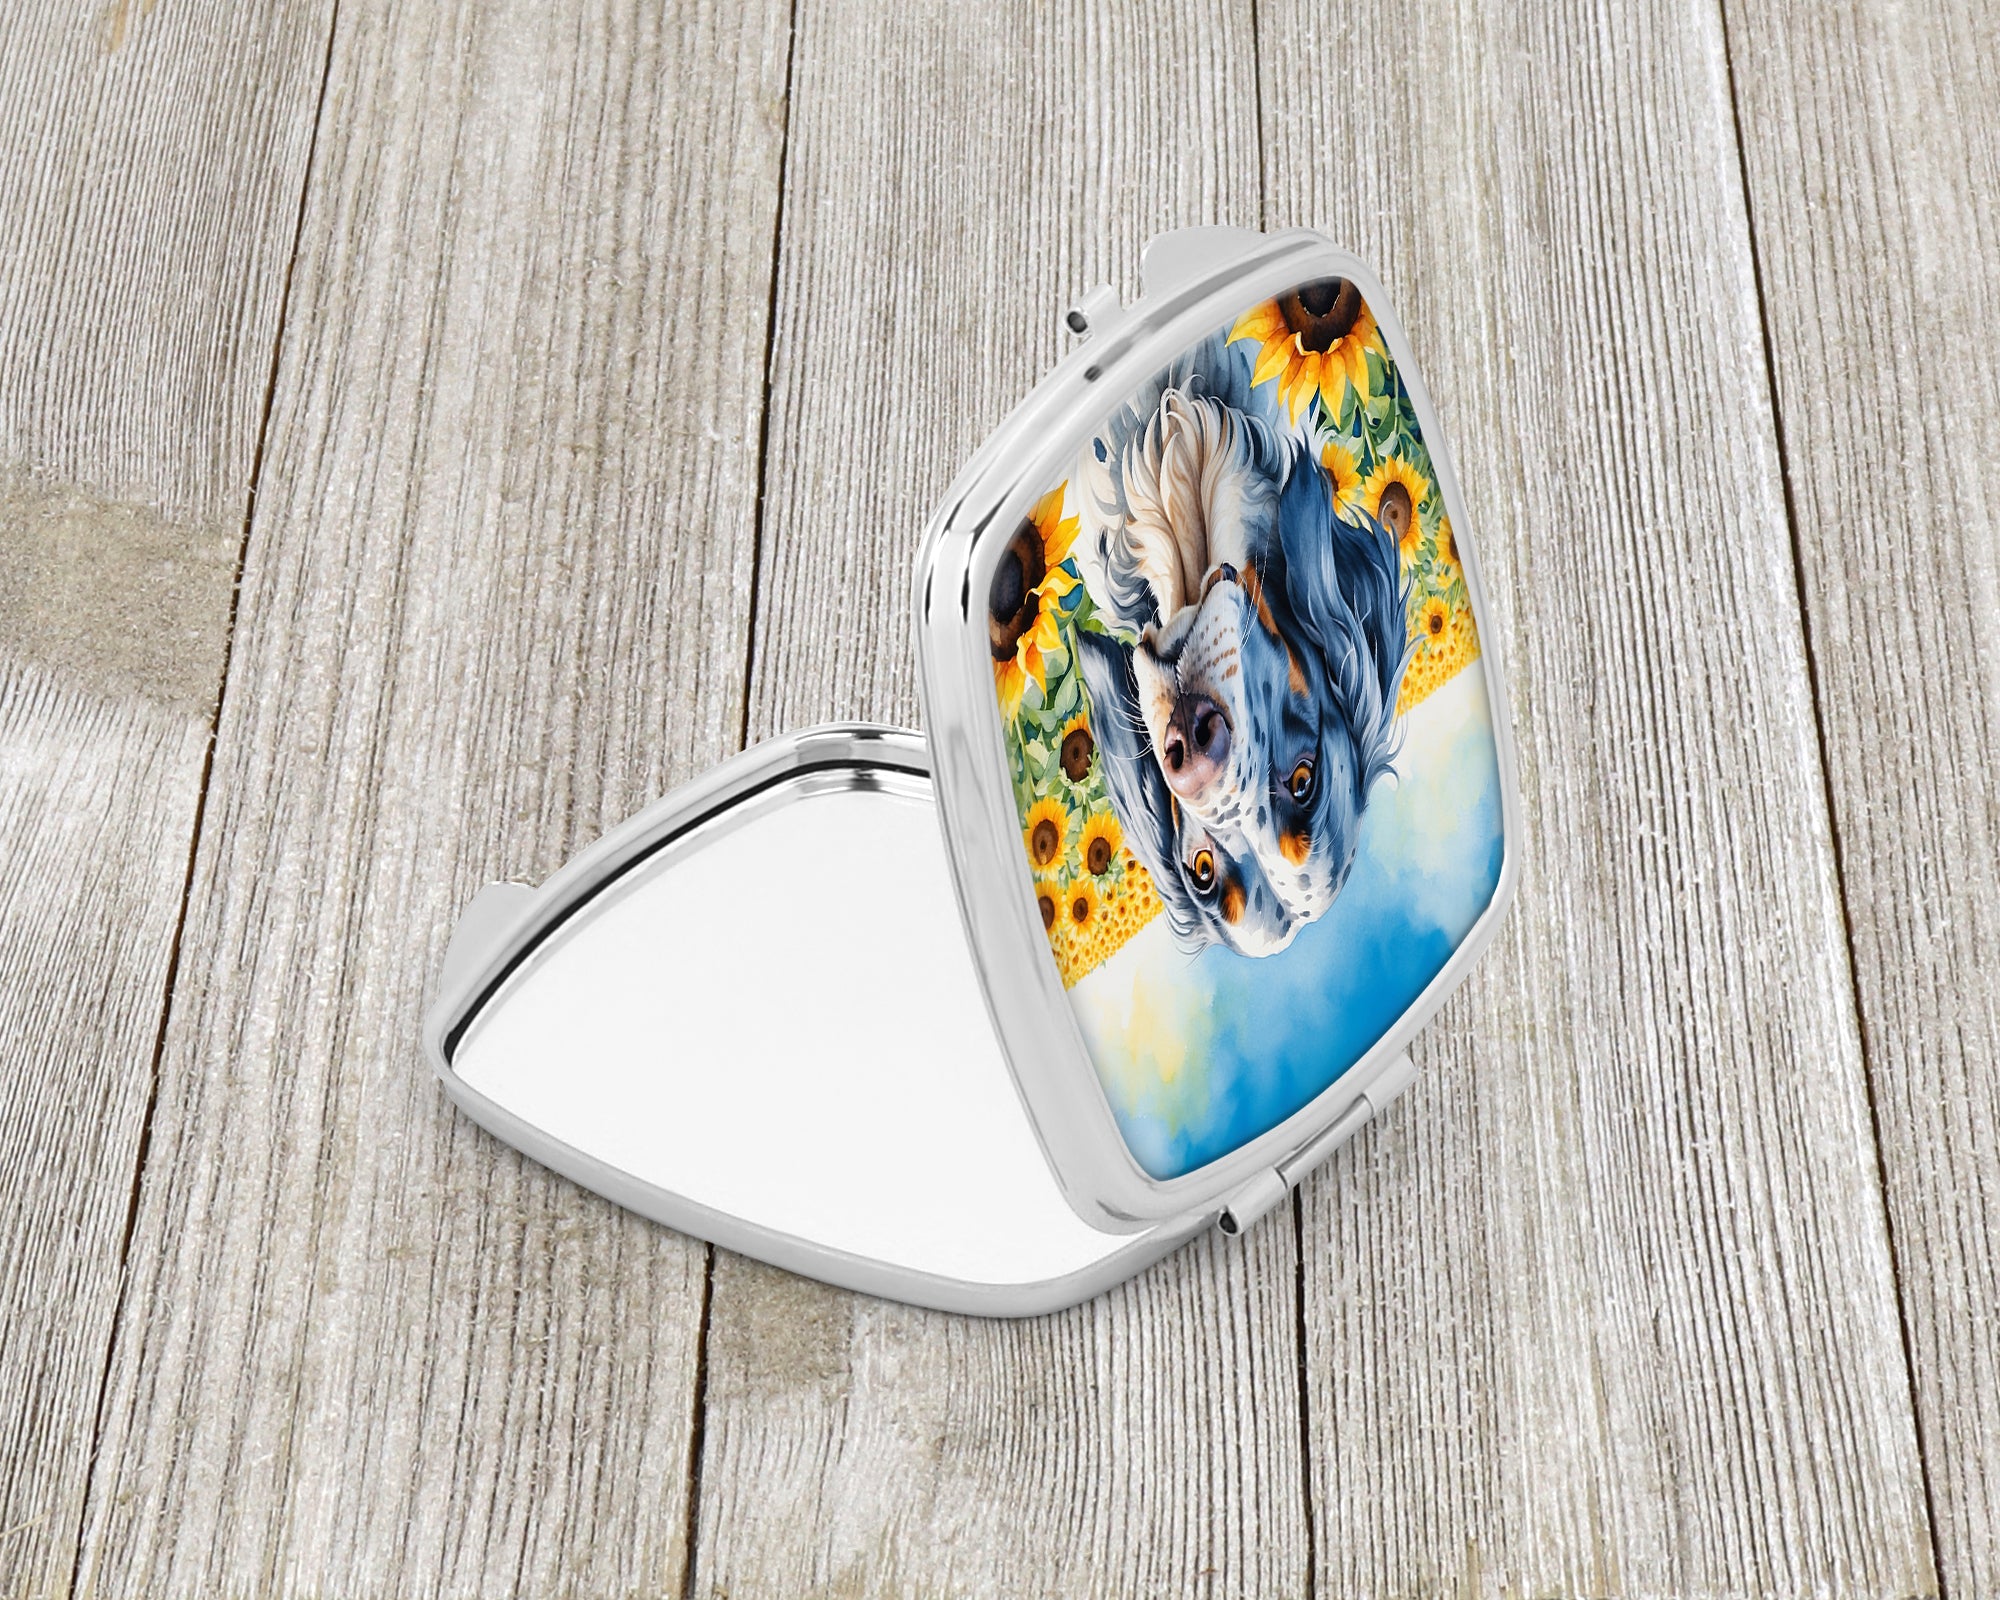 Buy this English Setter in Sunflowers Compact Mirror